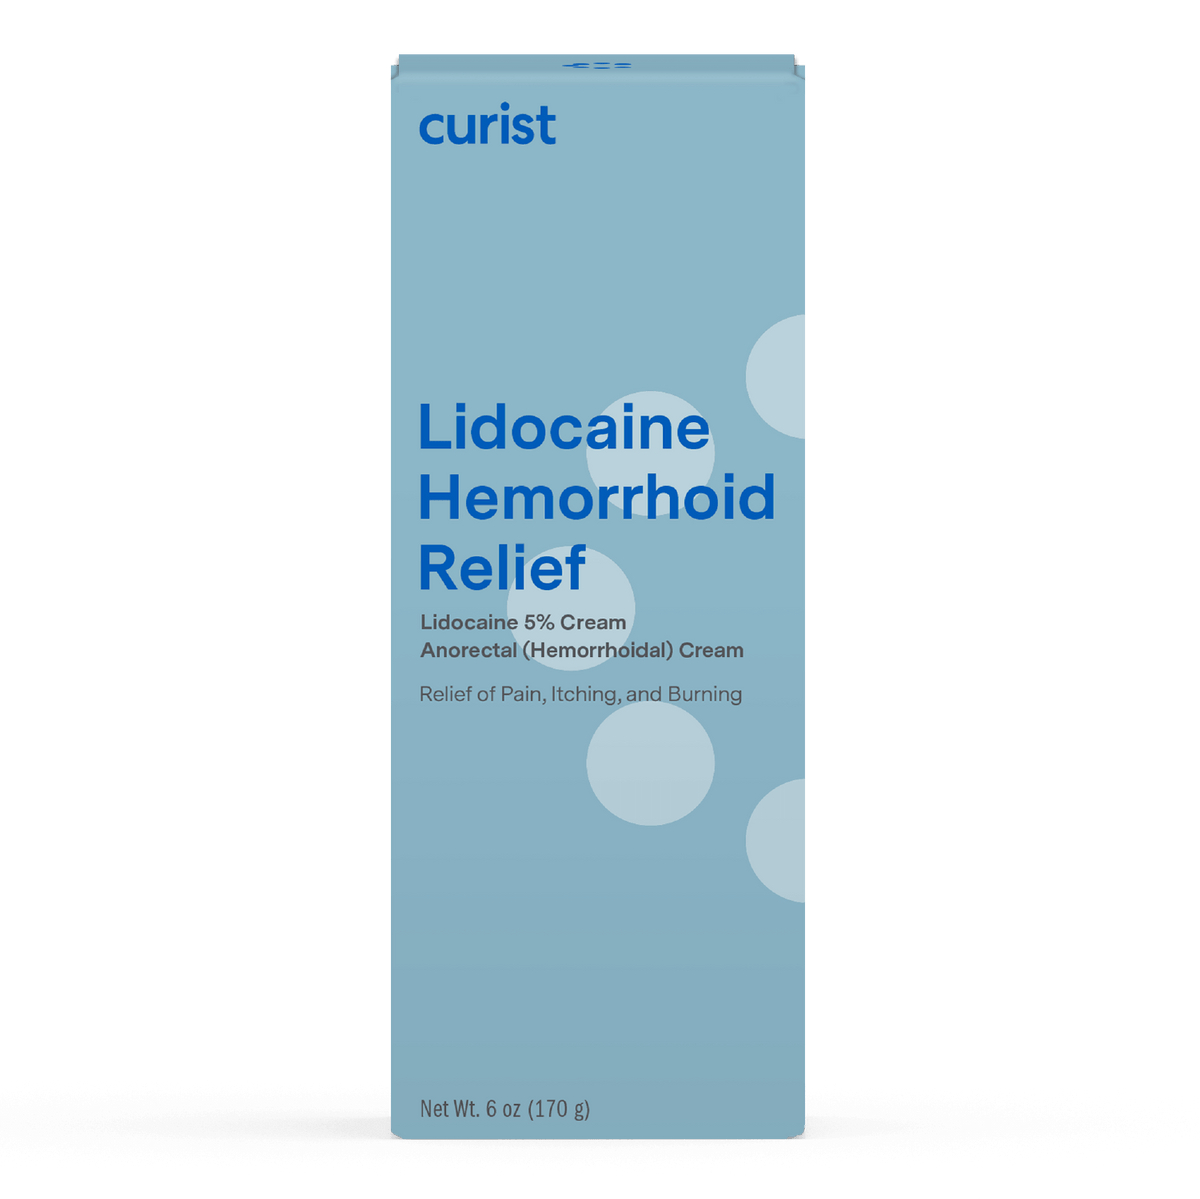 Our hemorrhoid cream has with lidocaine 5% for hemorrhoids.. Hemorrhoid lidocaine cream 5%, compare to Recticare. Buy hemorrhoid cream with lidocaine 5% online at Curist.